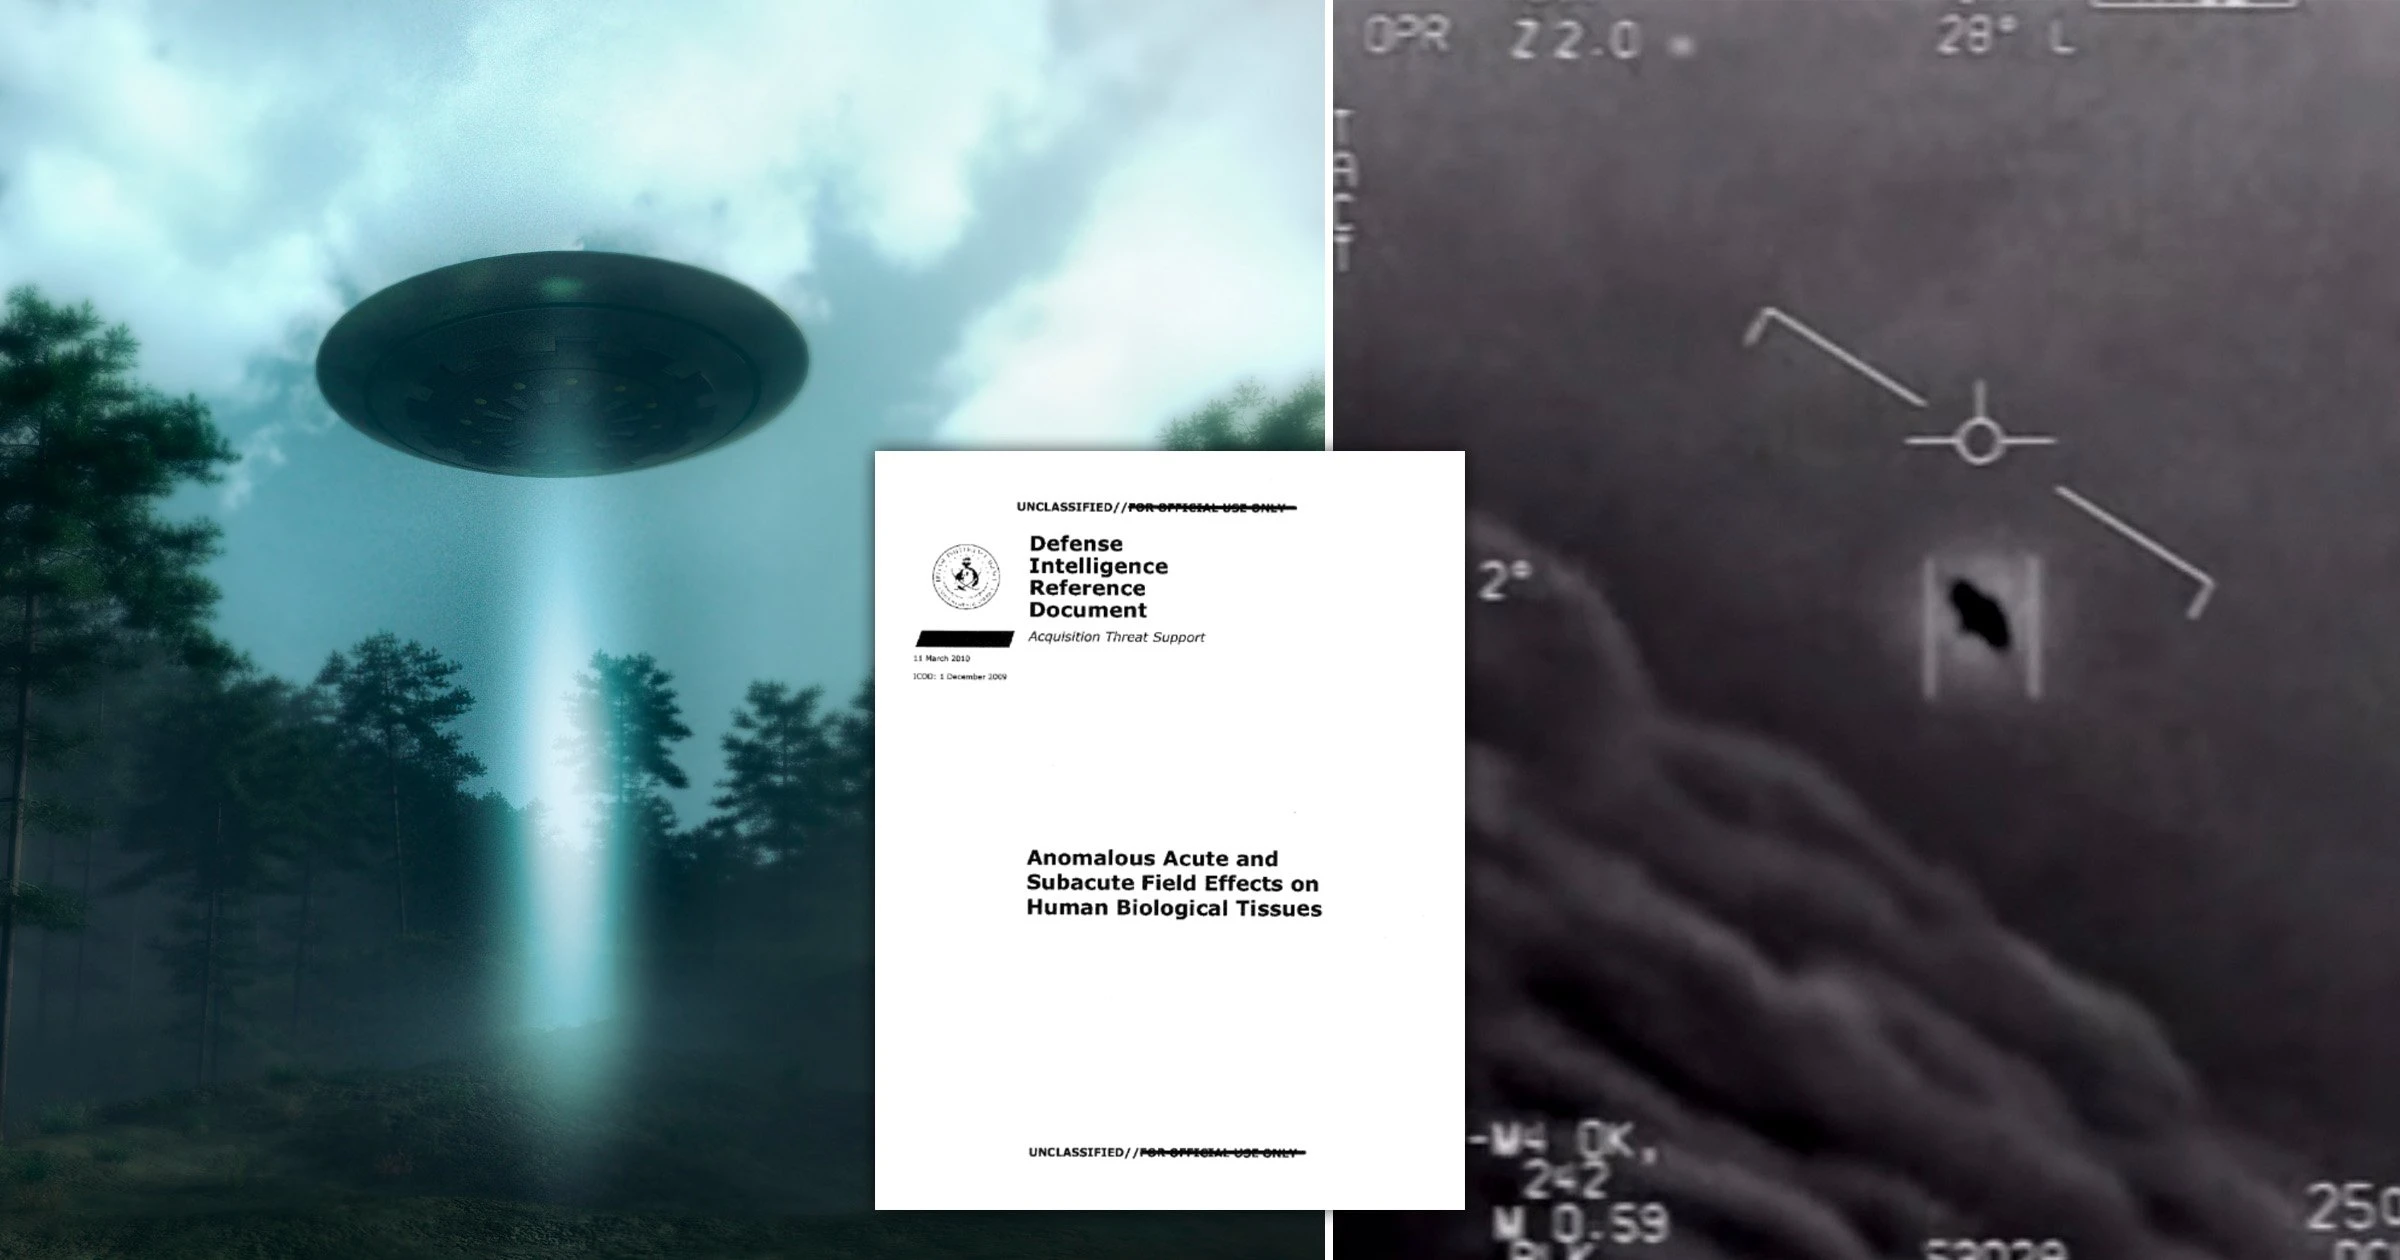 Cases involving UFOs are on the rise